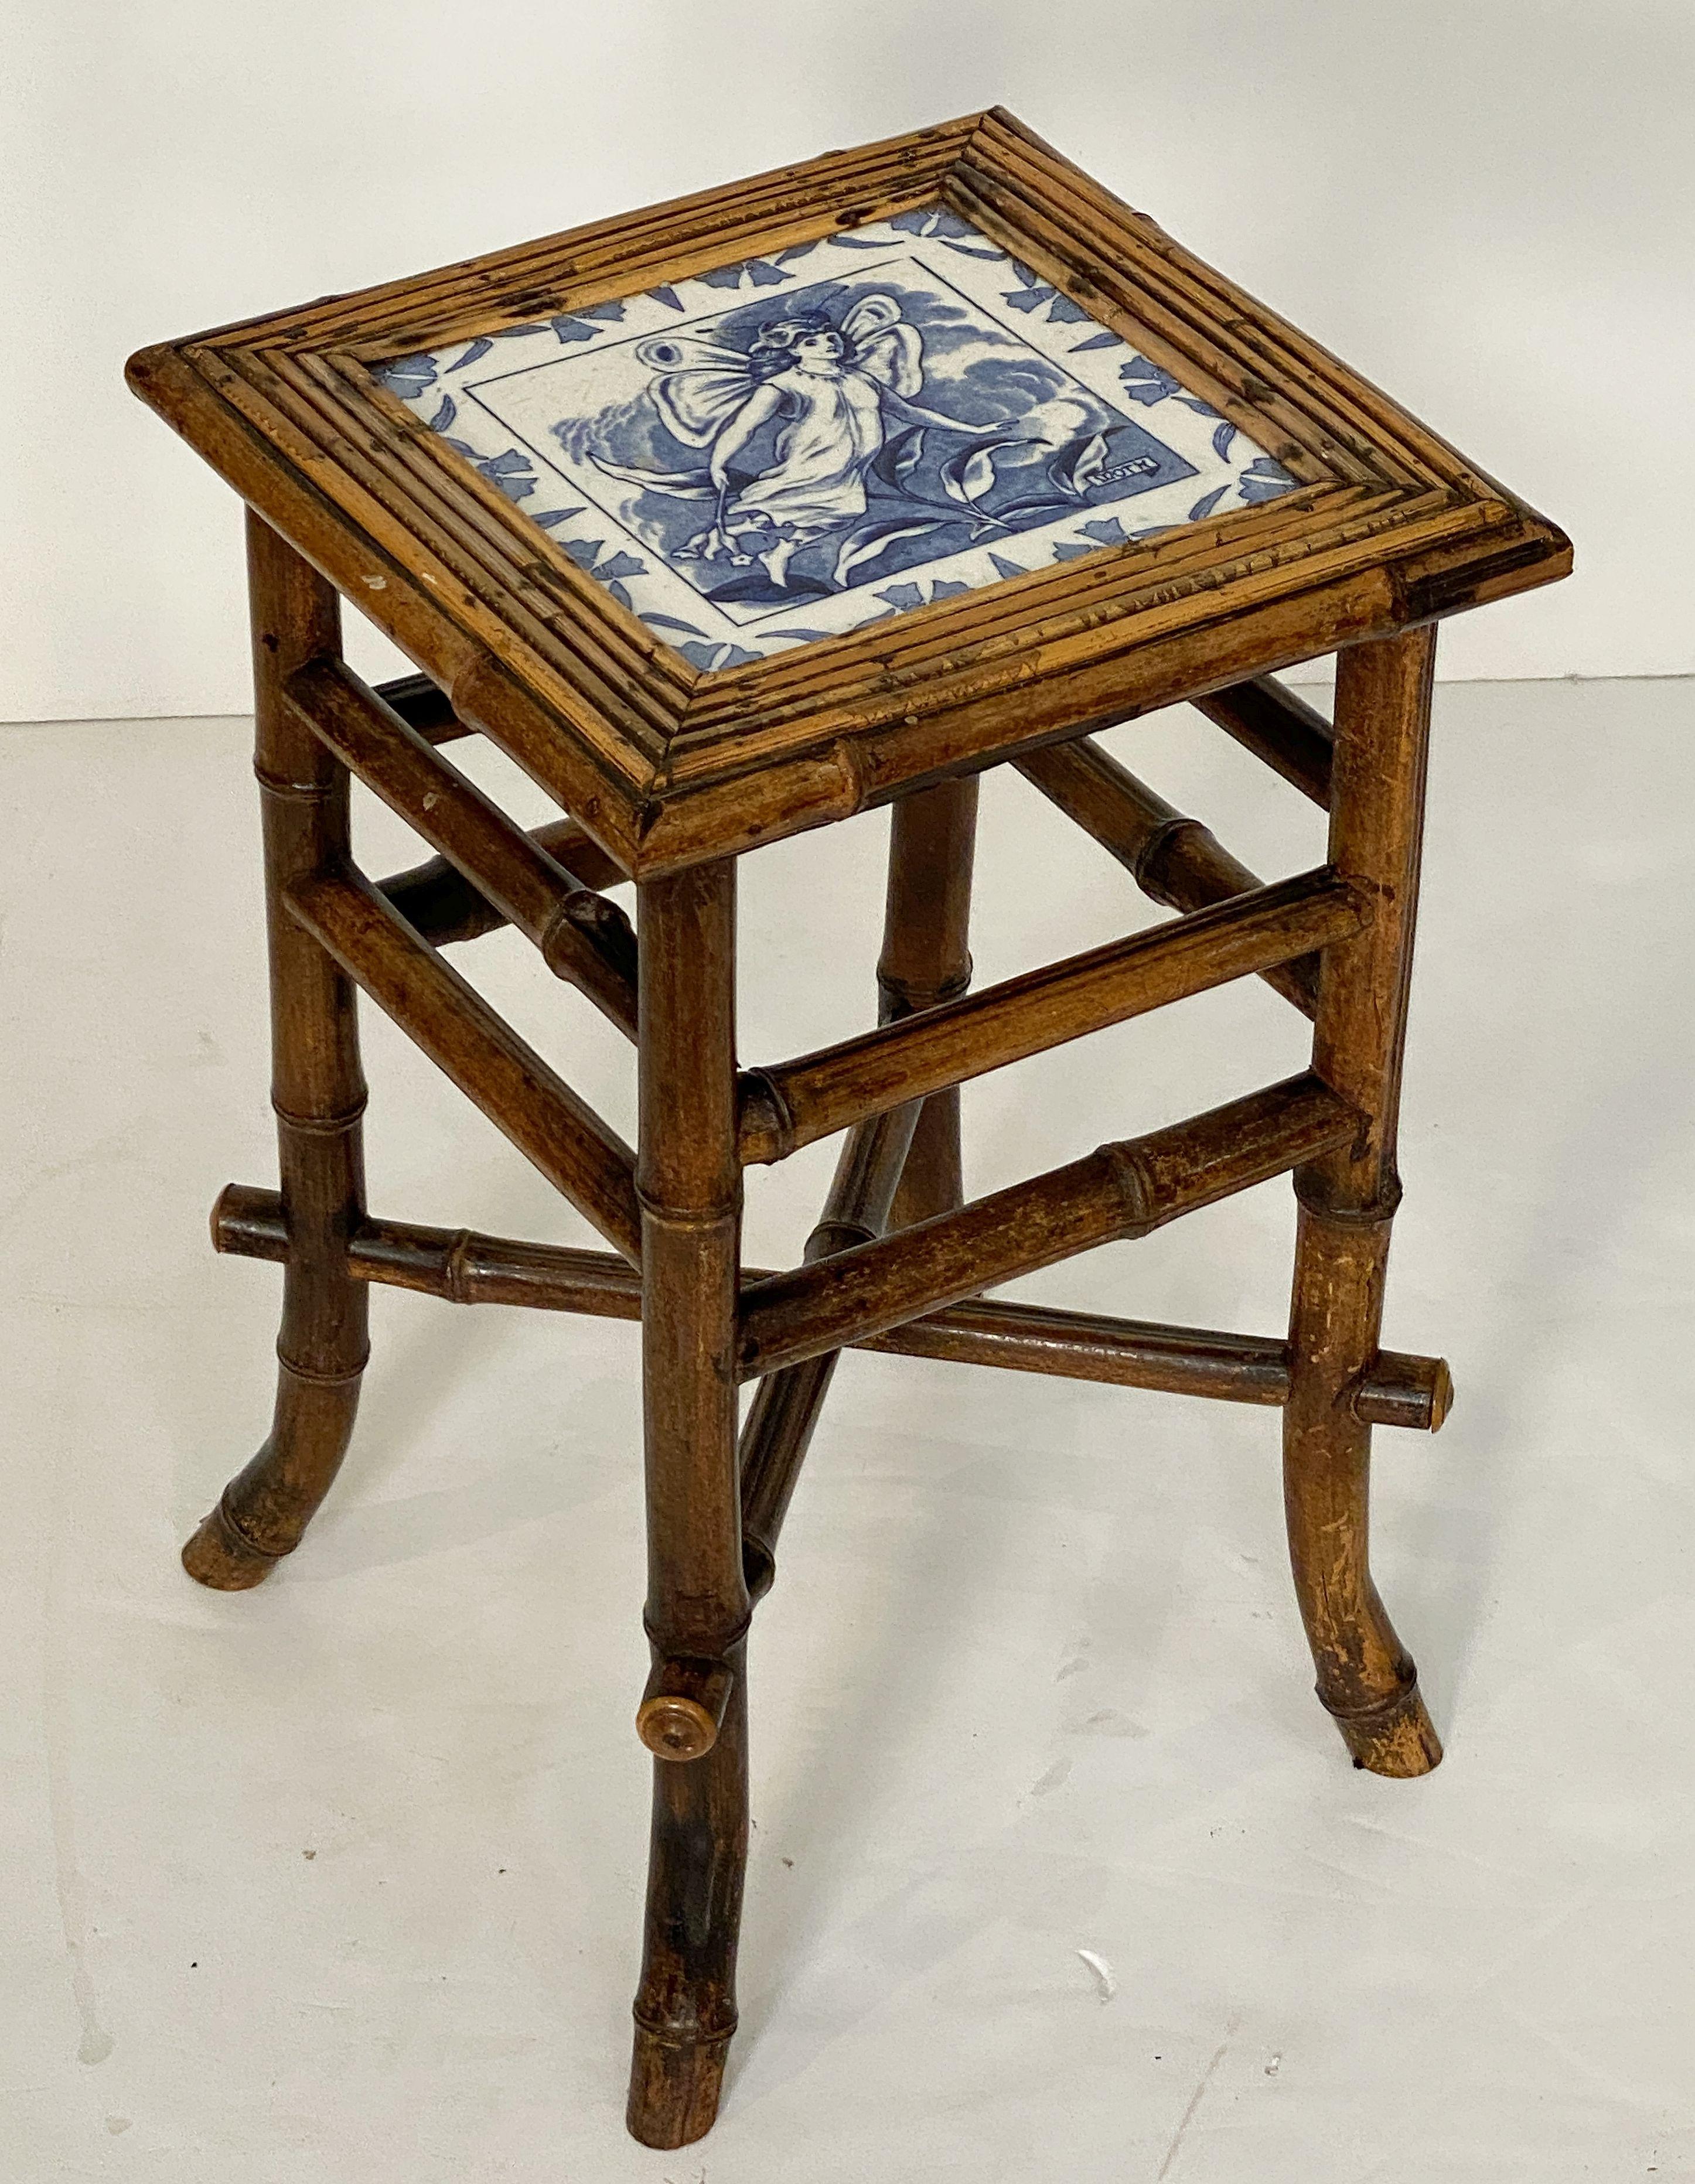 Pottery English Bamboo Table or Stool with Tile Seat from the Aesthetic Movement Era For Sale